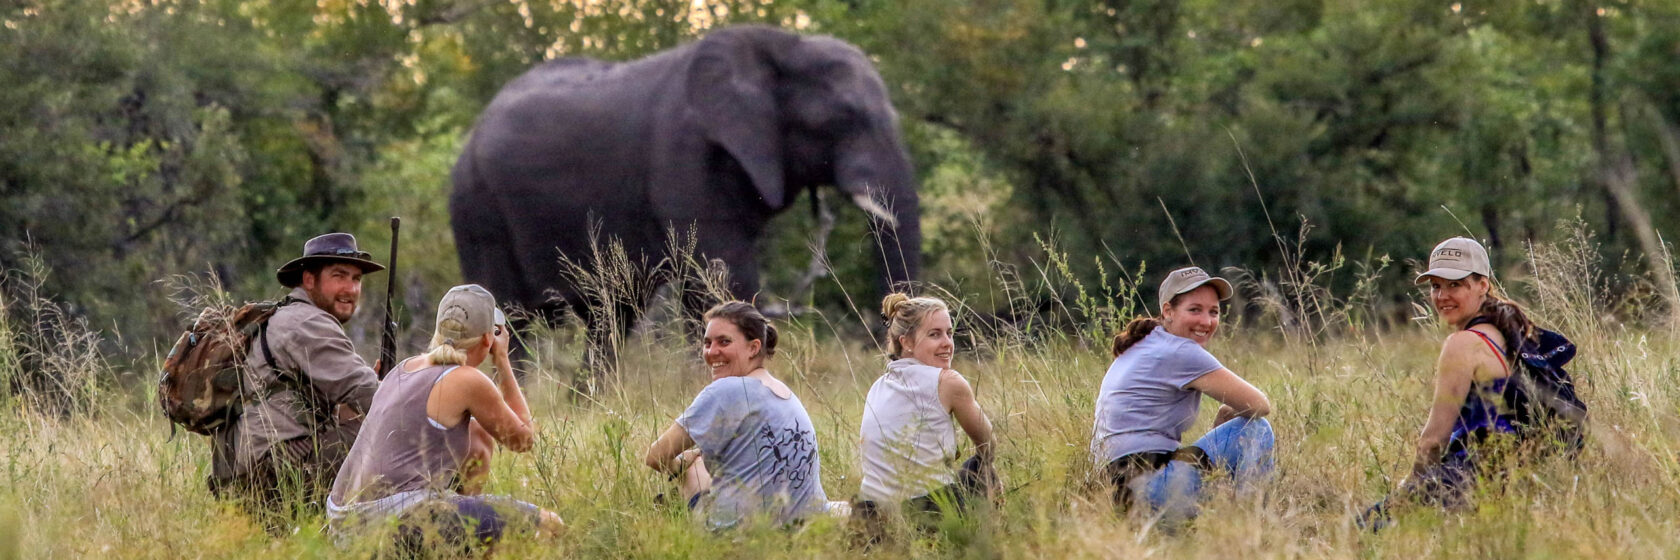 A group of travelers observing an elephant in the wild in Zimbabwe.